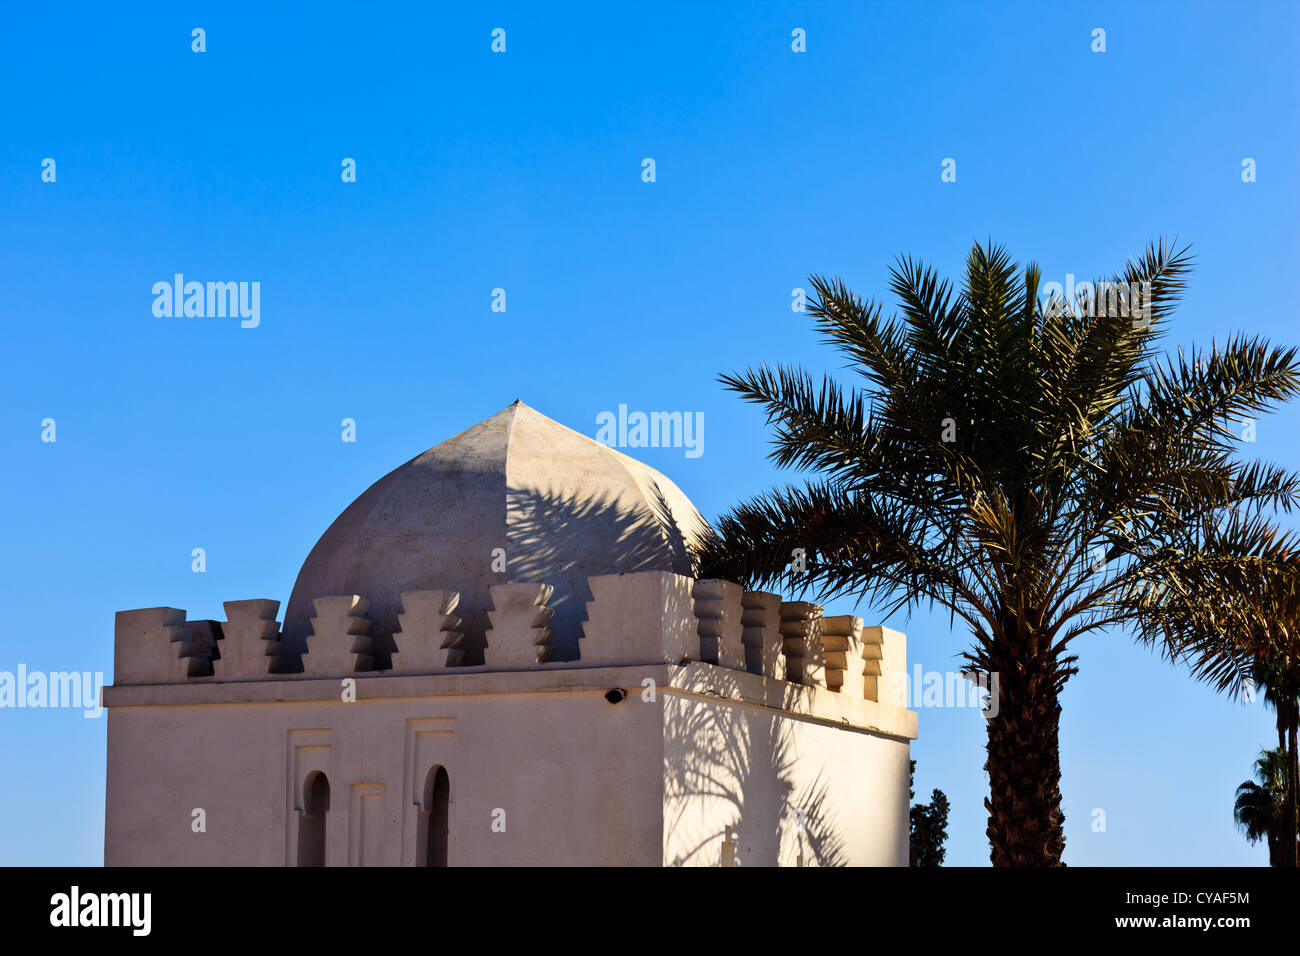 Whitewashed exterior of traditional moorish style domed building framed by a  palm tree in Marrakesh, Morocco. Stock Photo